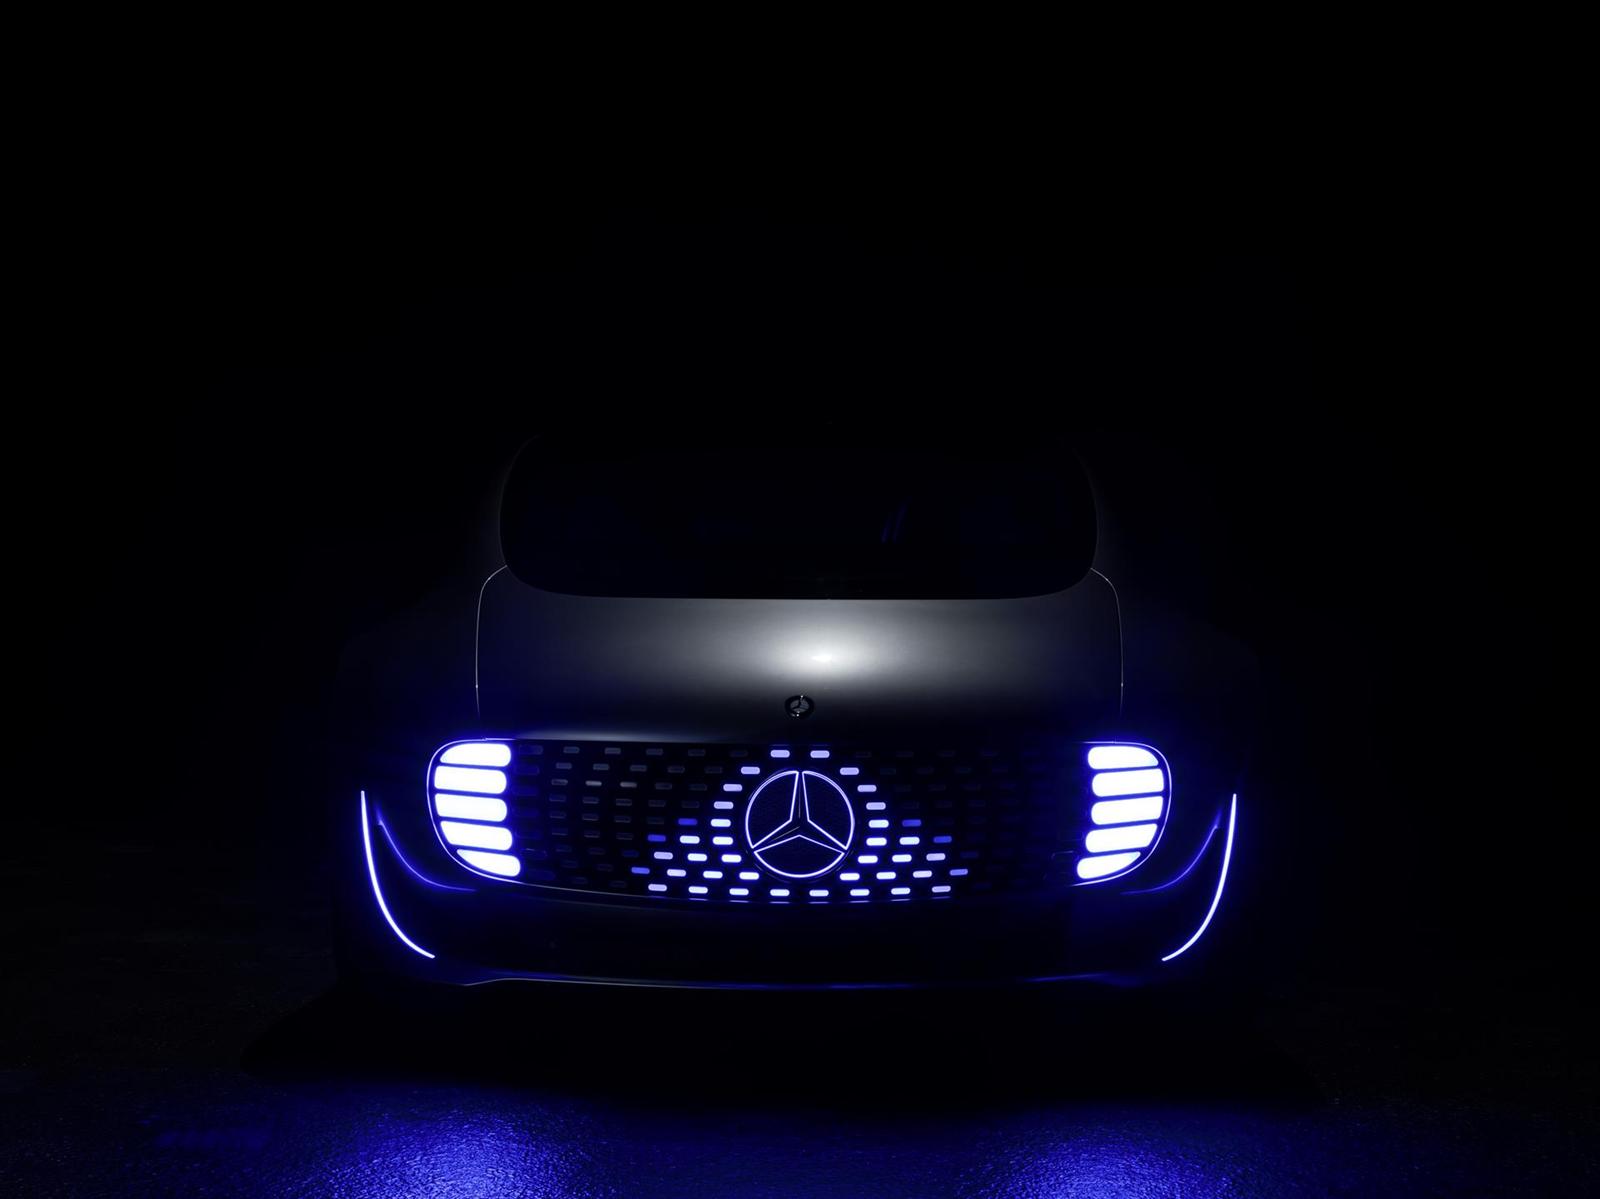 2015 Mercedes-Benz F 015 Luxury in Motion Concept